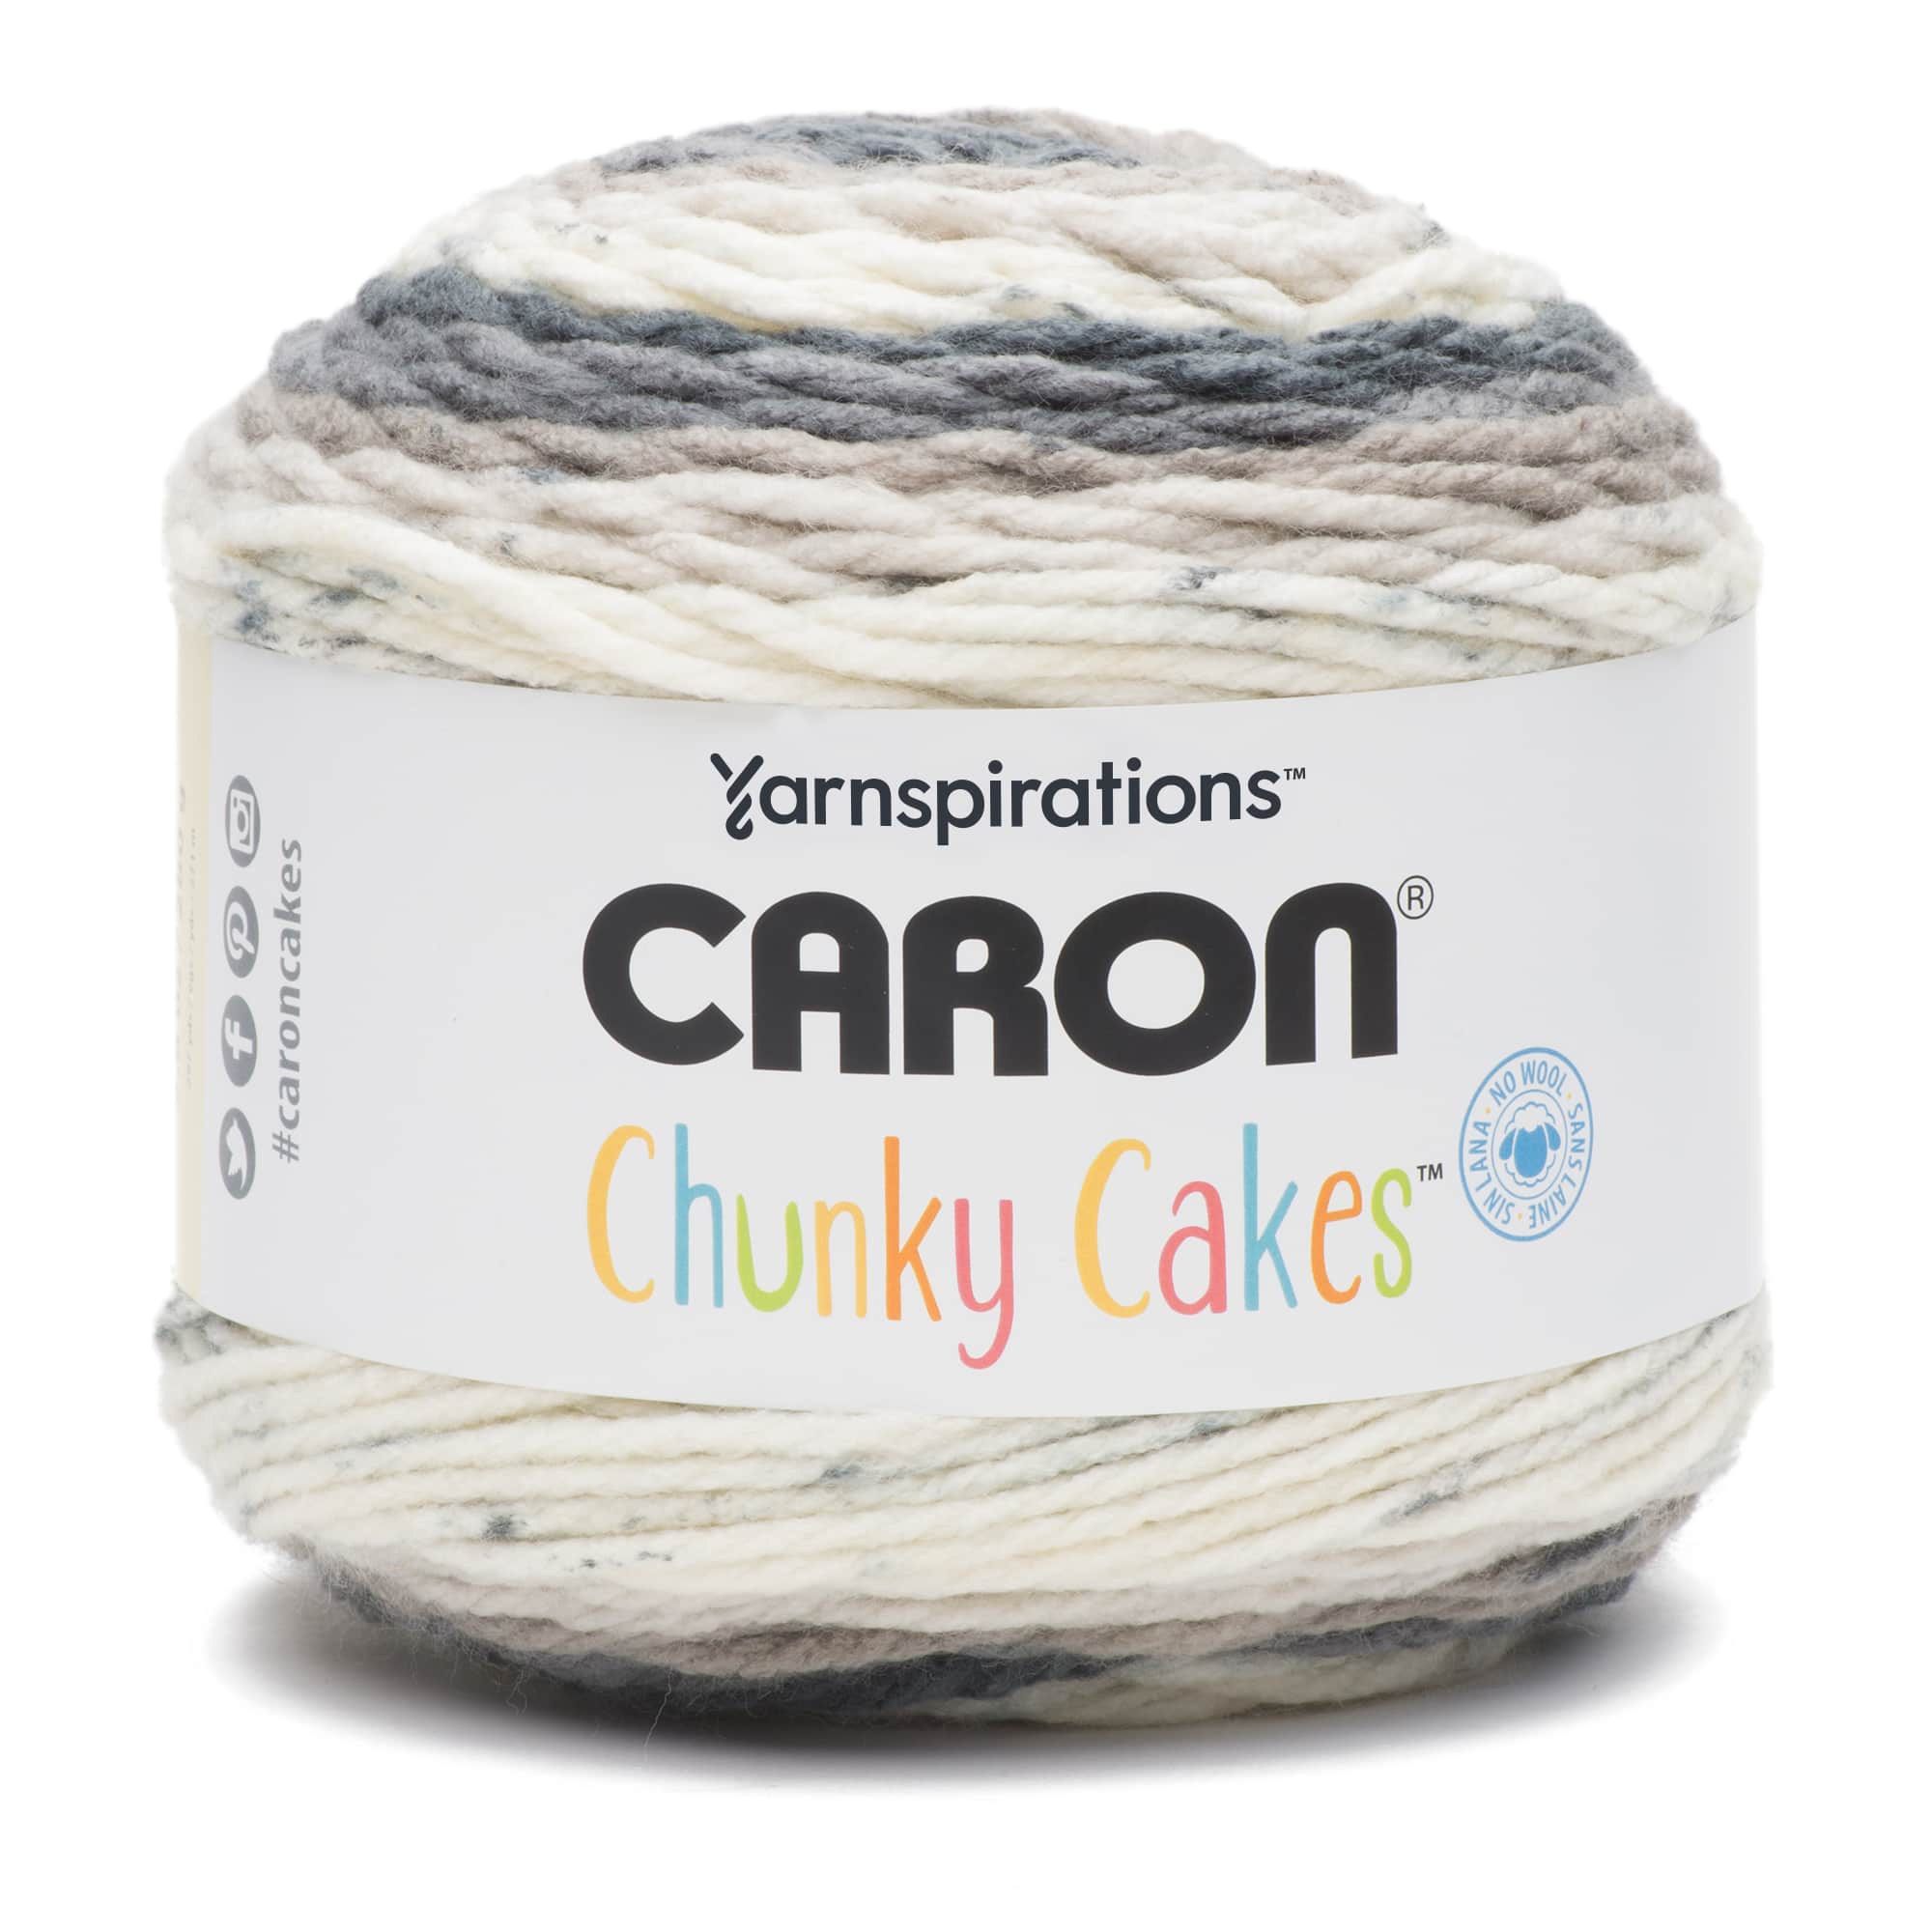 Caron Anniversary Cakes Yarn Review - The Loopy Lamb